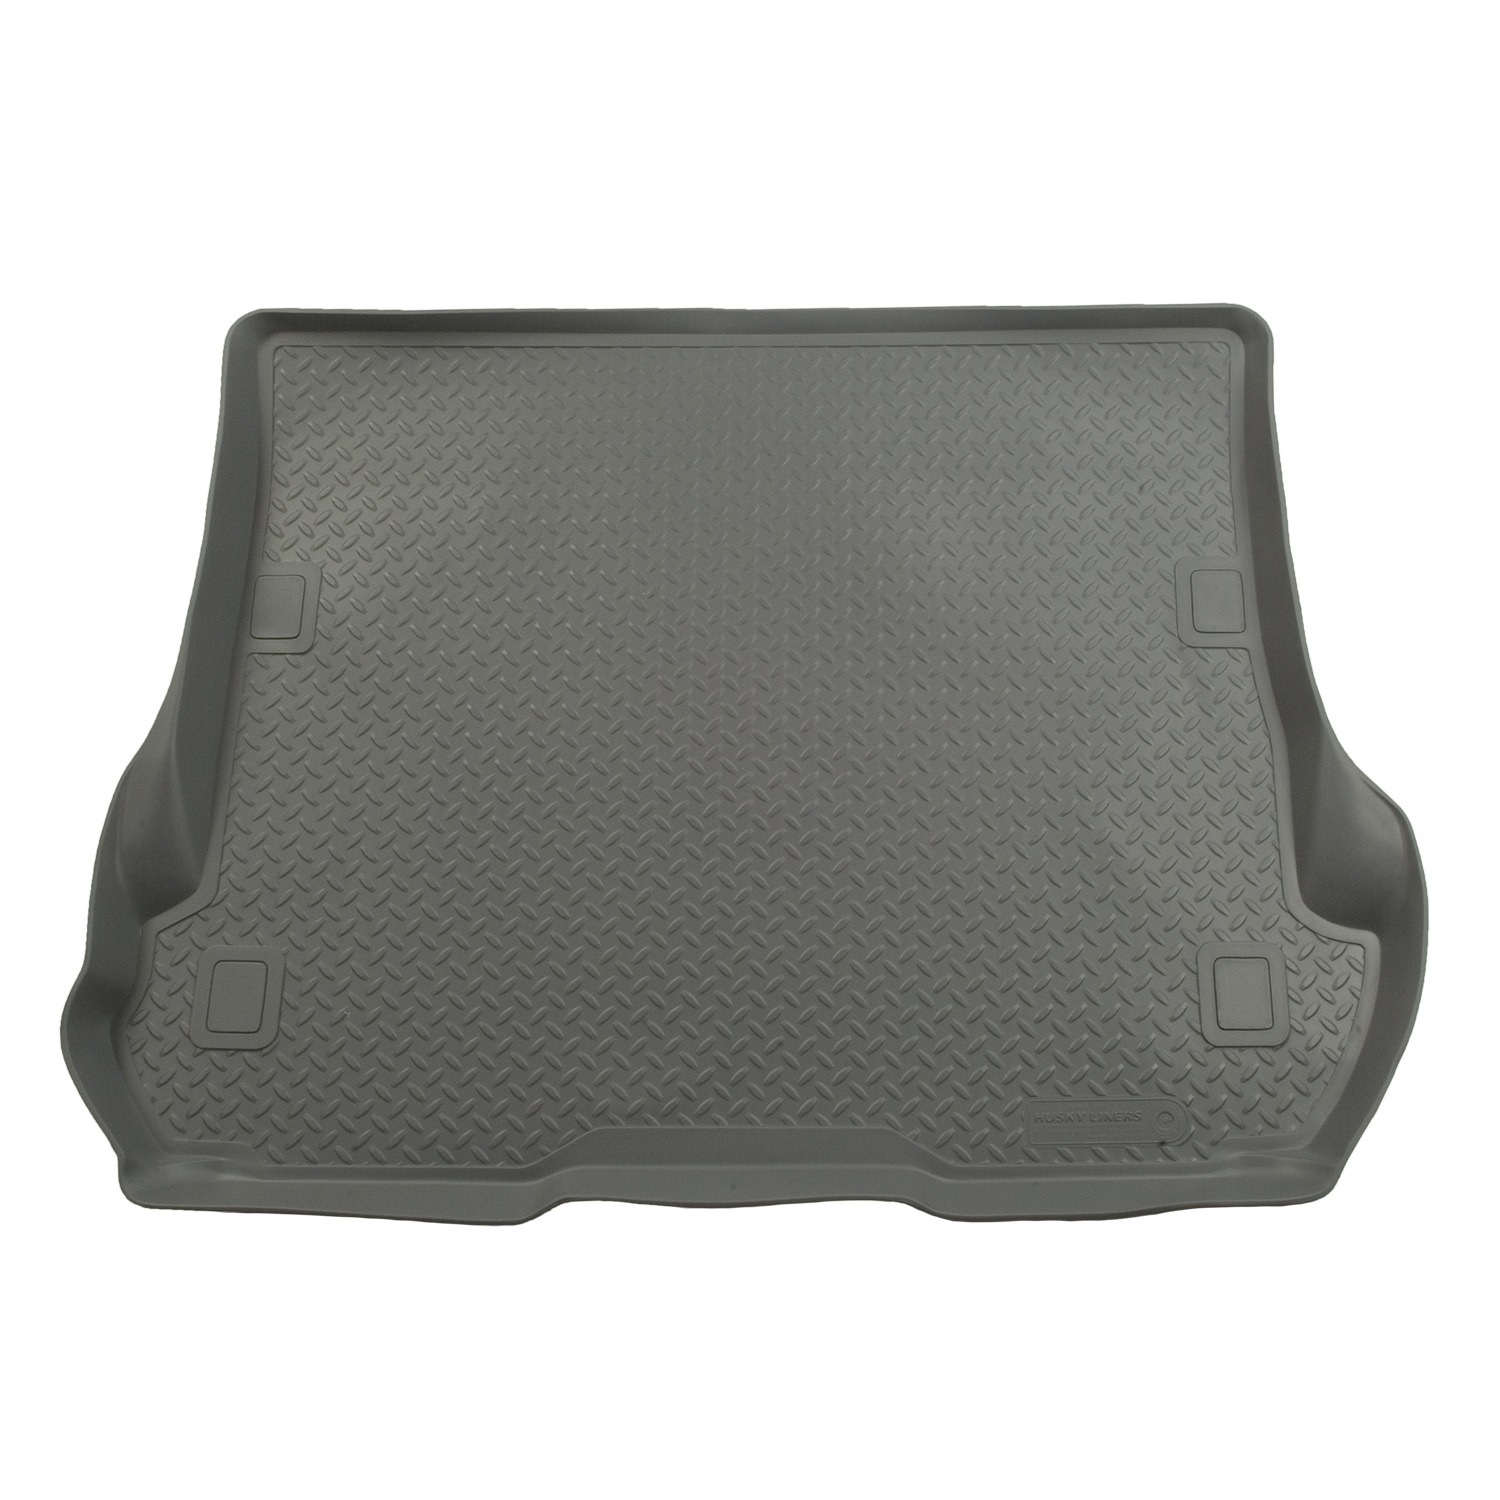 Husky Liners Husky Liners 20202 Classic Style; Cargo Liner Fits 02-07 Liberty